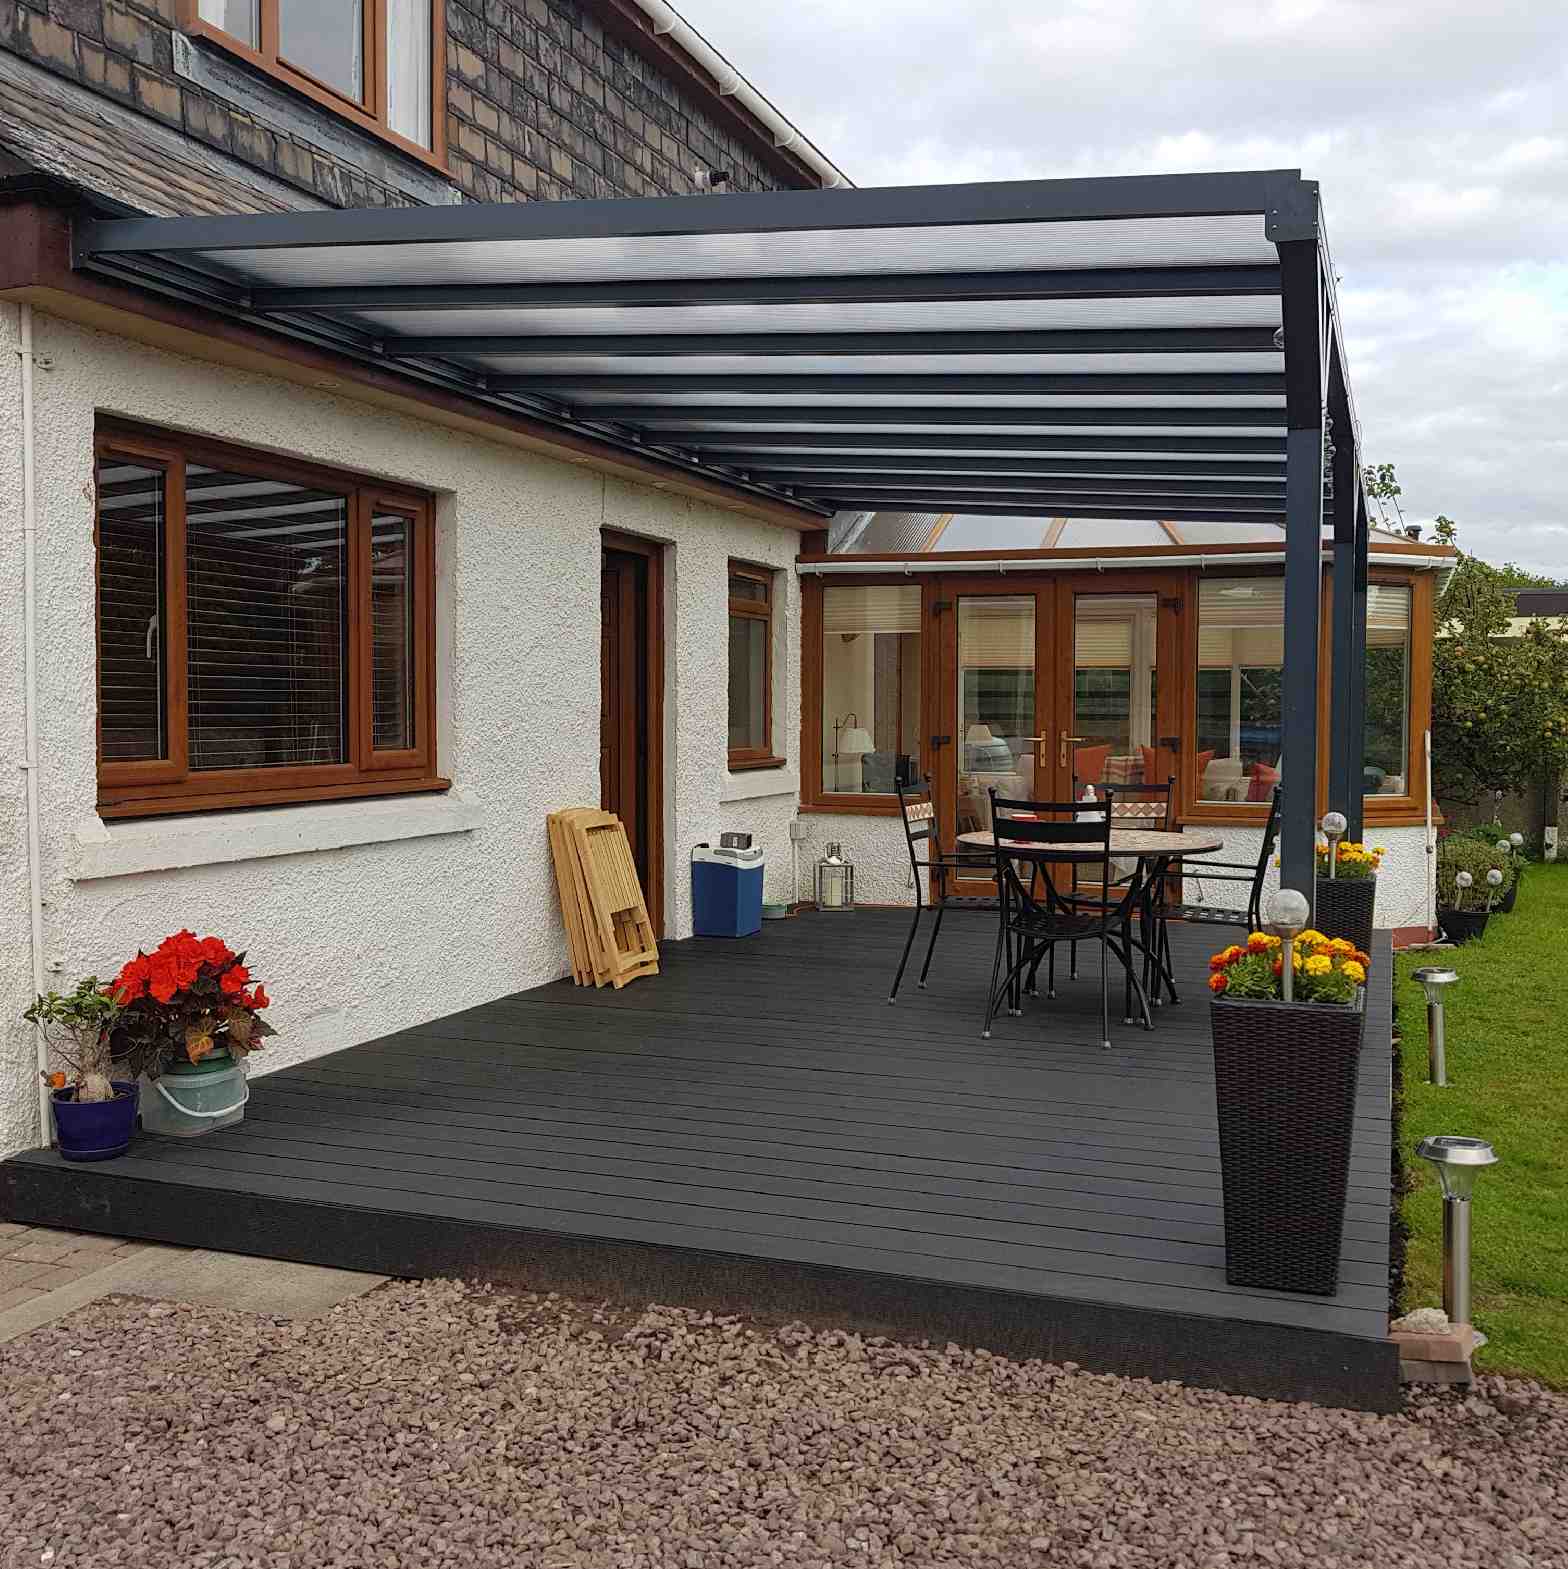 Buy Omega Verandah, Anthracite Grey, 6mm Glass Clear Plate Polycarbonate Glazing - 9.8m (W) x 1.5m (P), (5) Supporting Posts online today